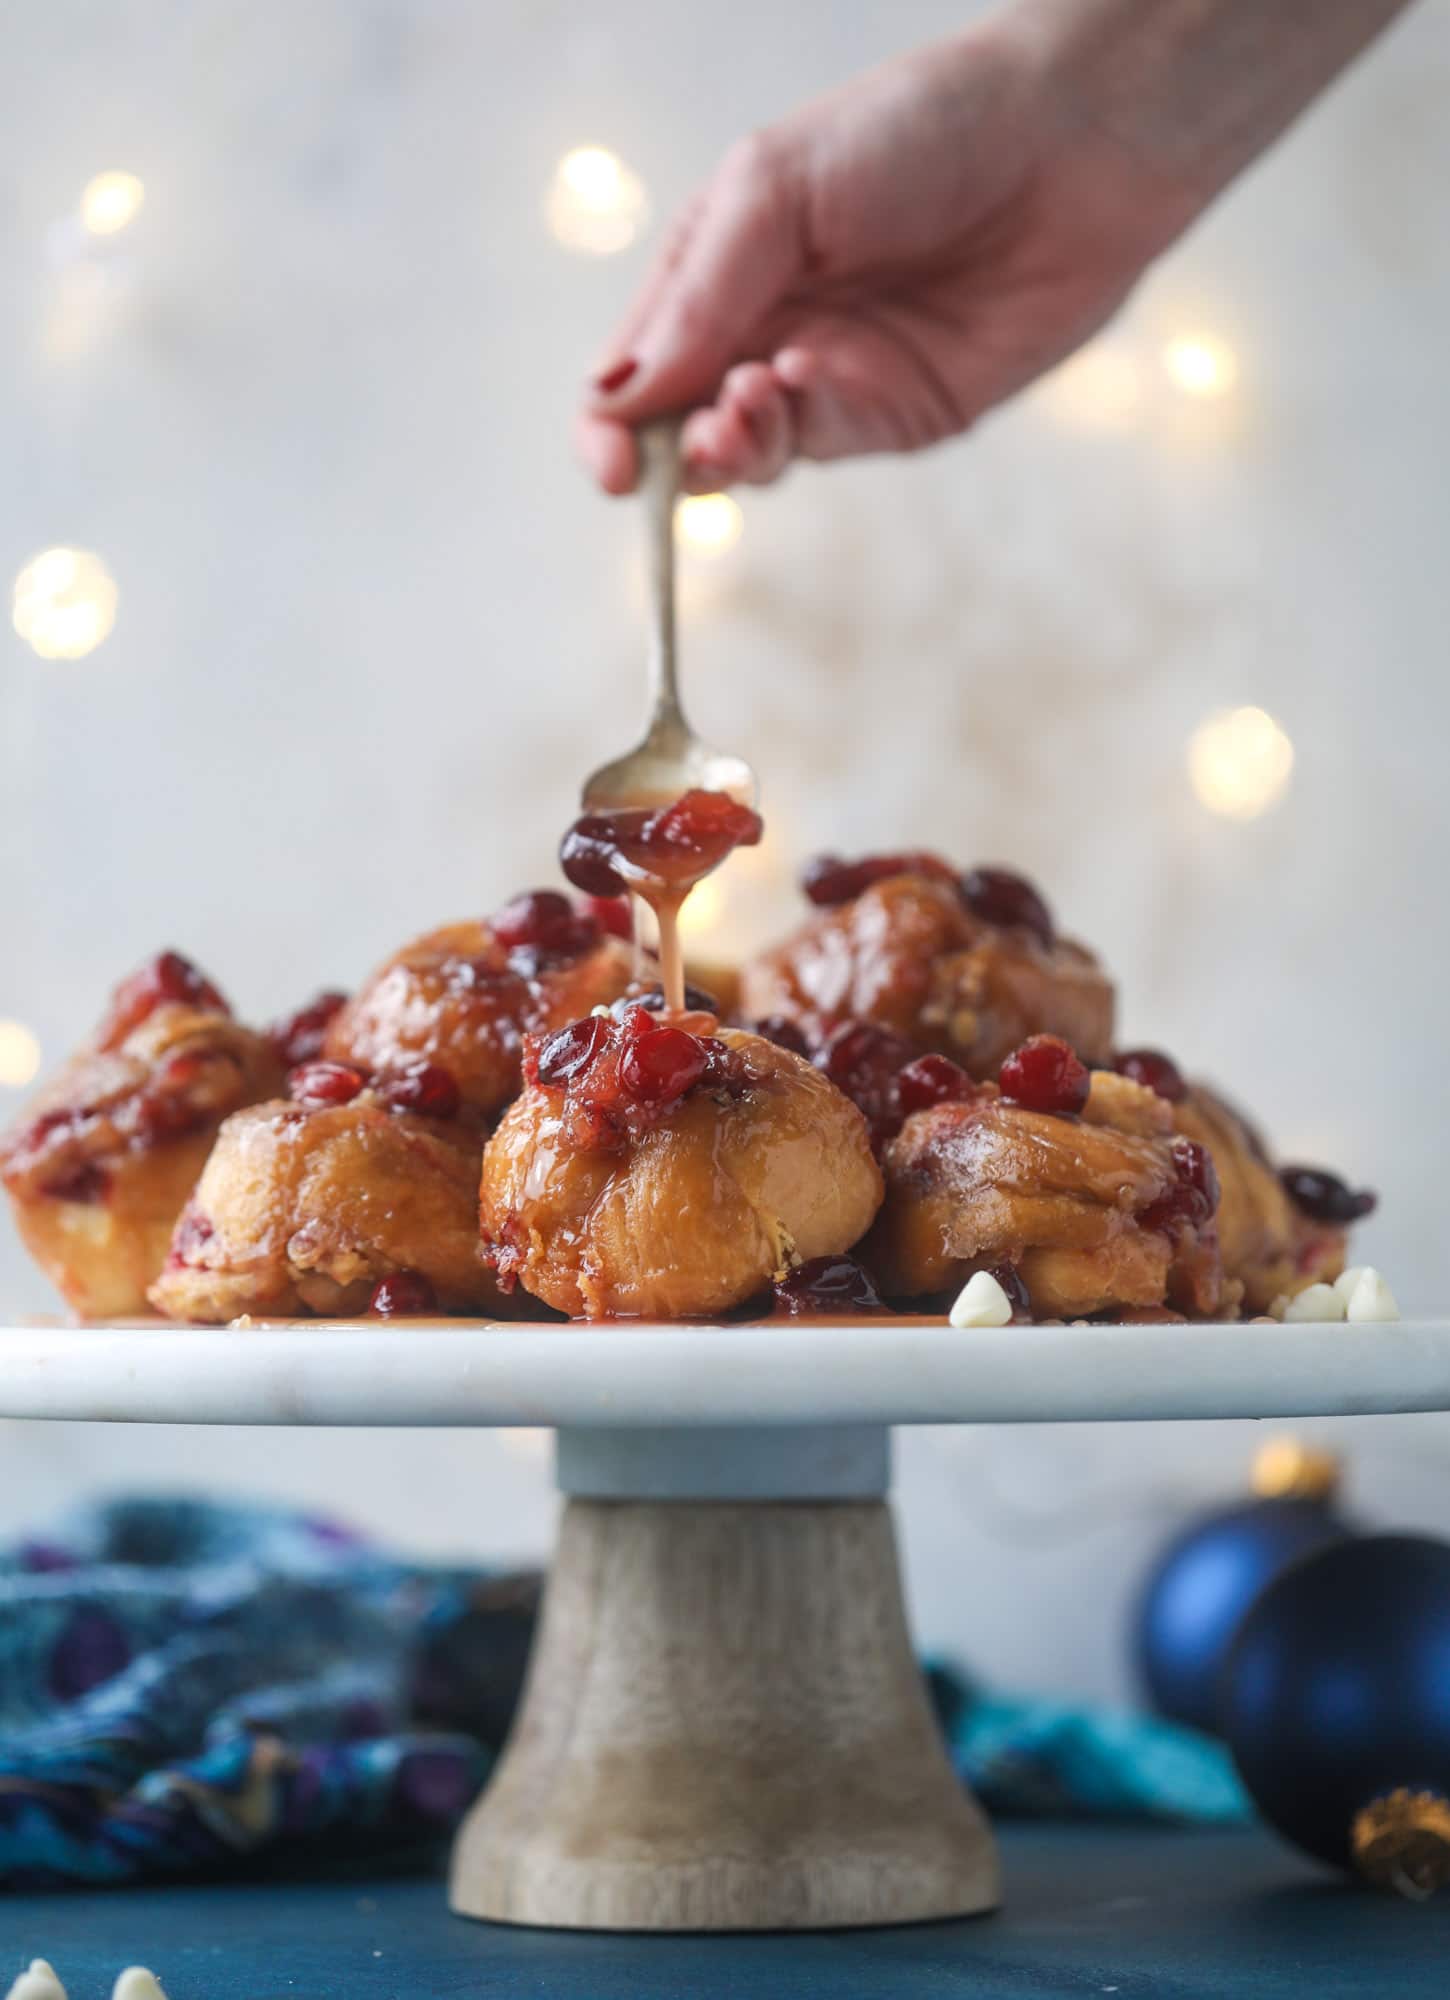 These white chocolate cranberry sticky buns are what holiday dreams are made of! Made in a muffin tin with fresh cranberries and creamy white chocolate, they are drizzled with cranberry caramel too! Dreamy! I howsweeteats.com #sticky #buns